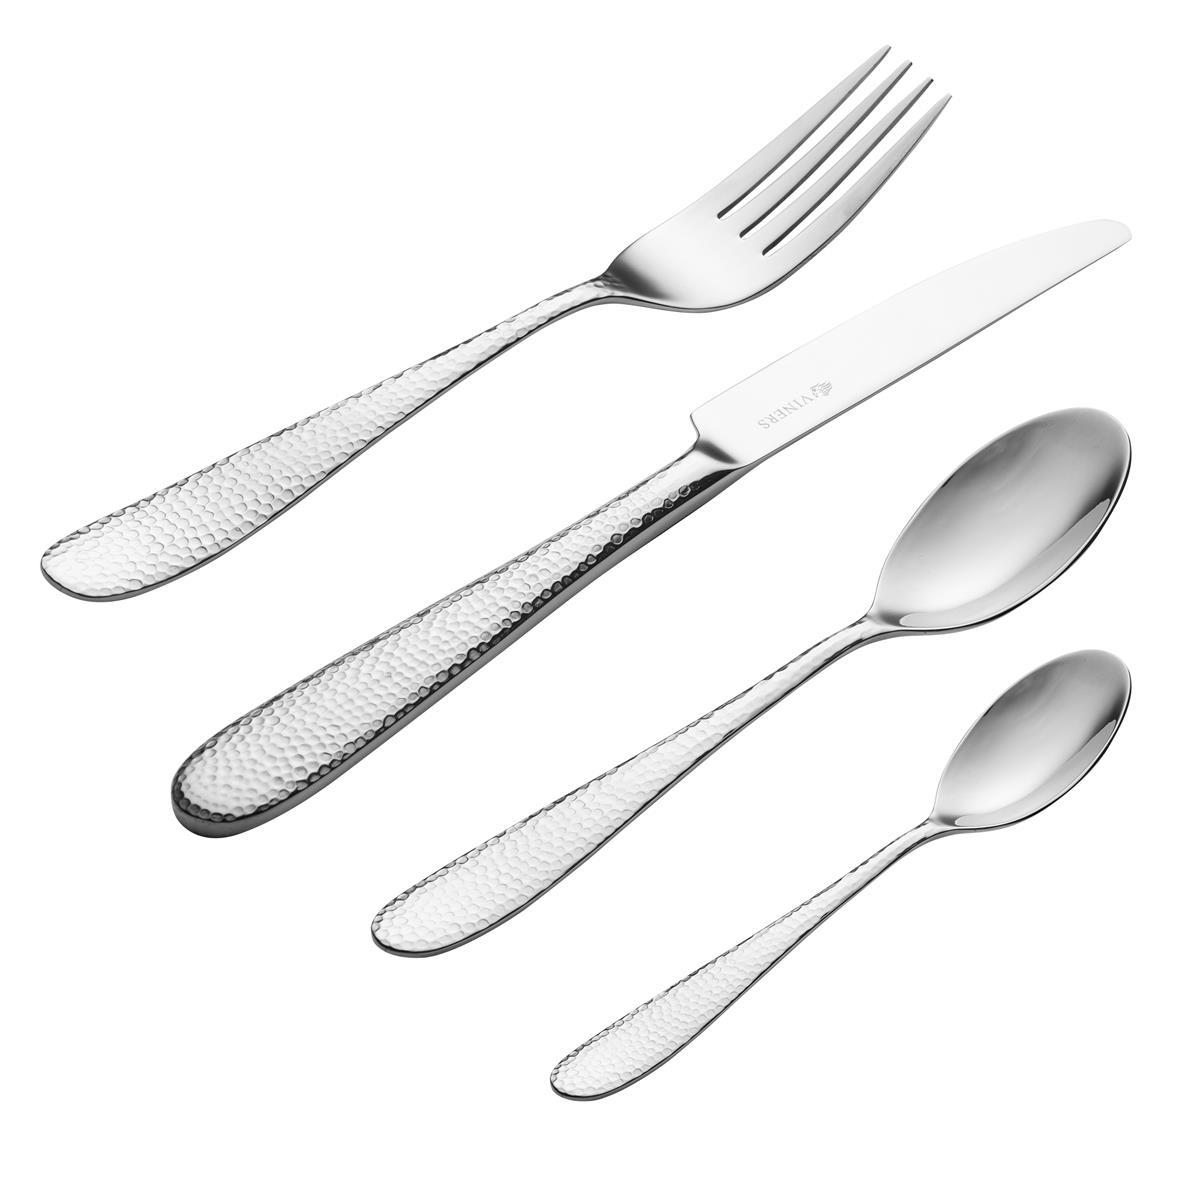 What is needed for receiving the Viners Glamour Cutlery Set?